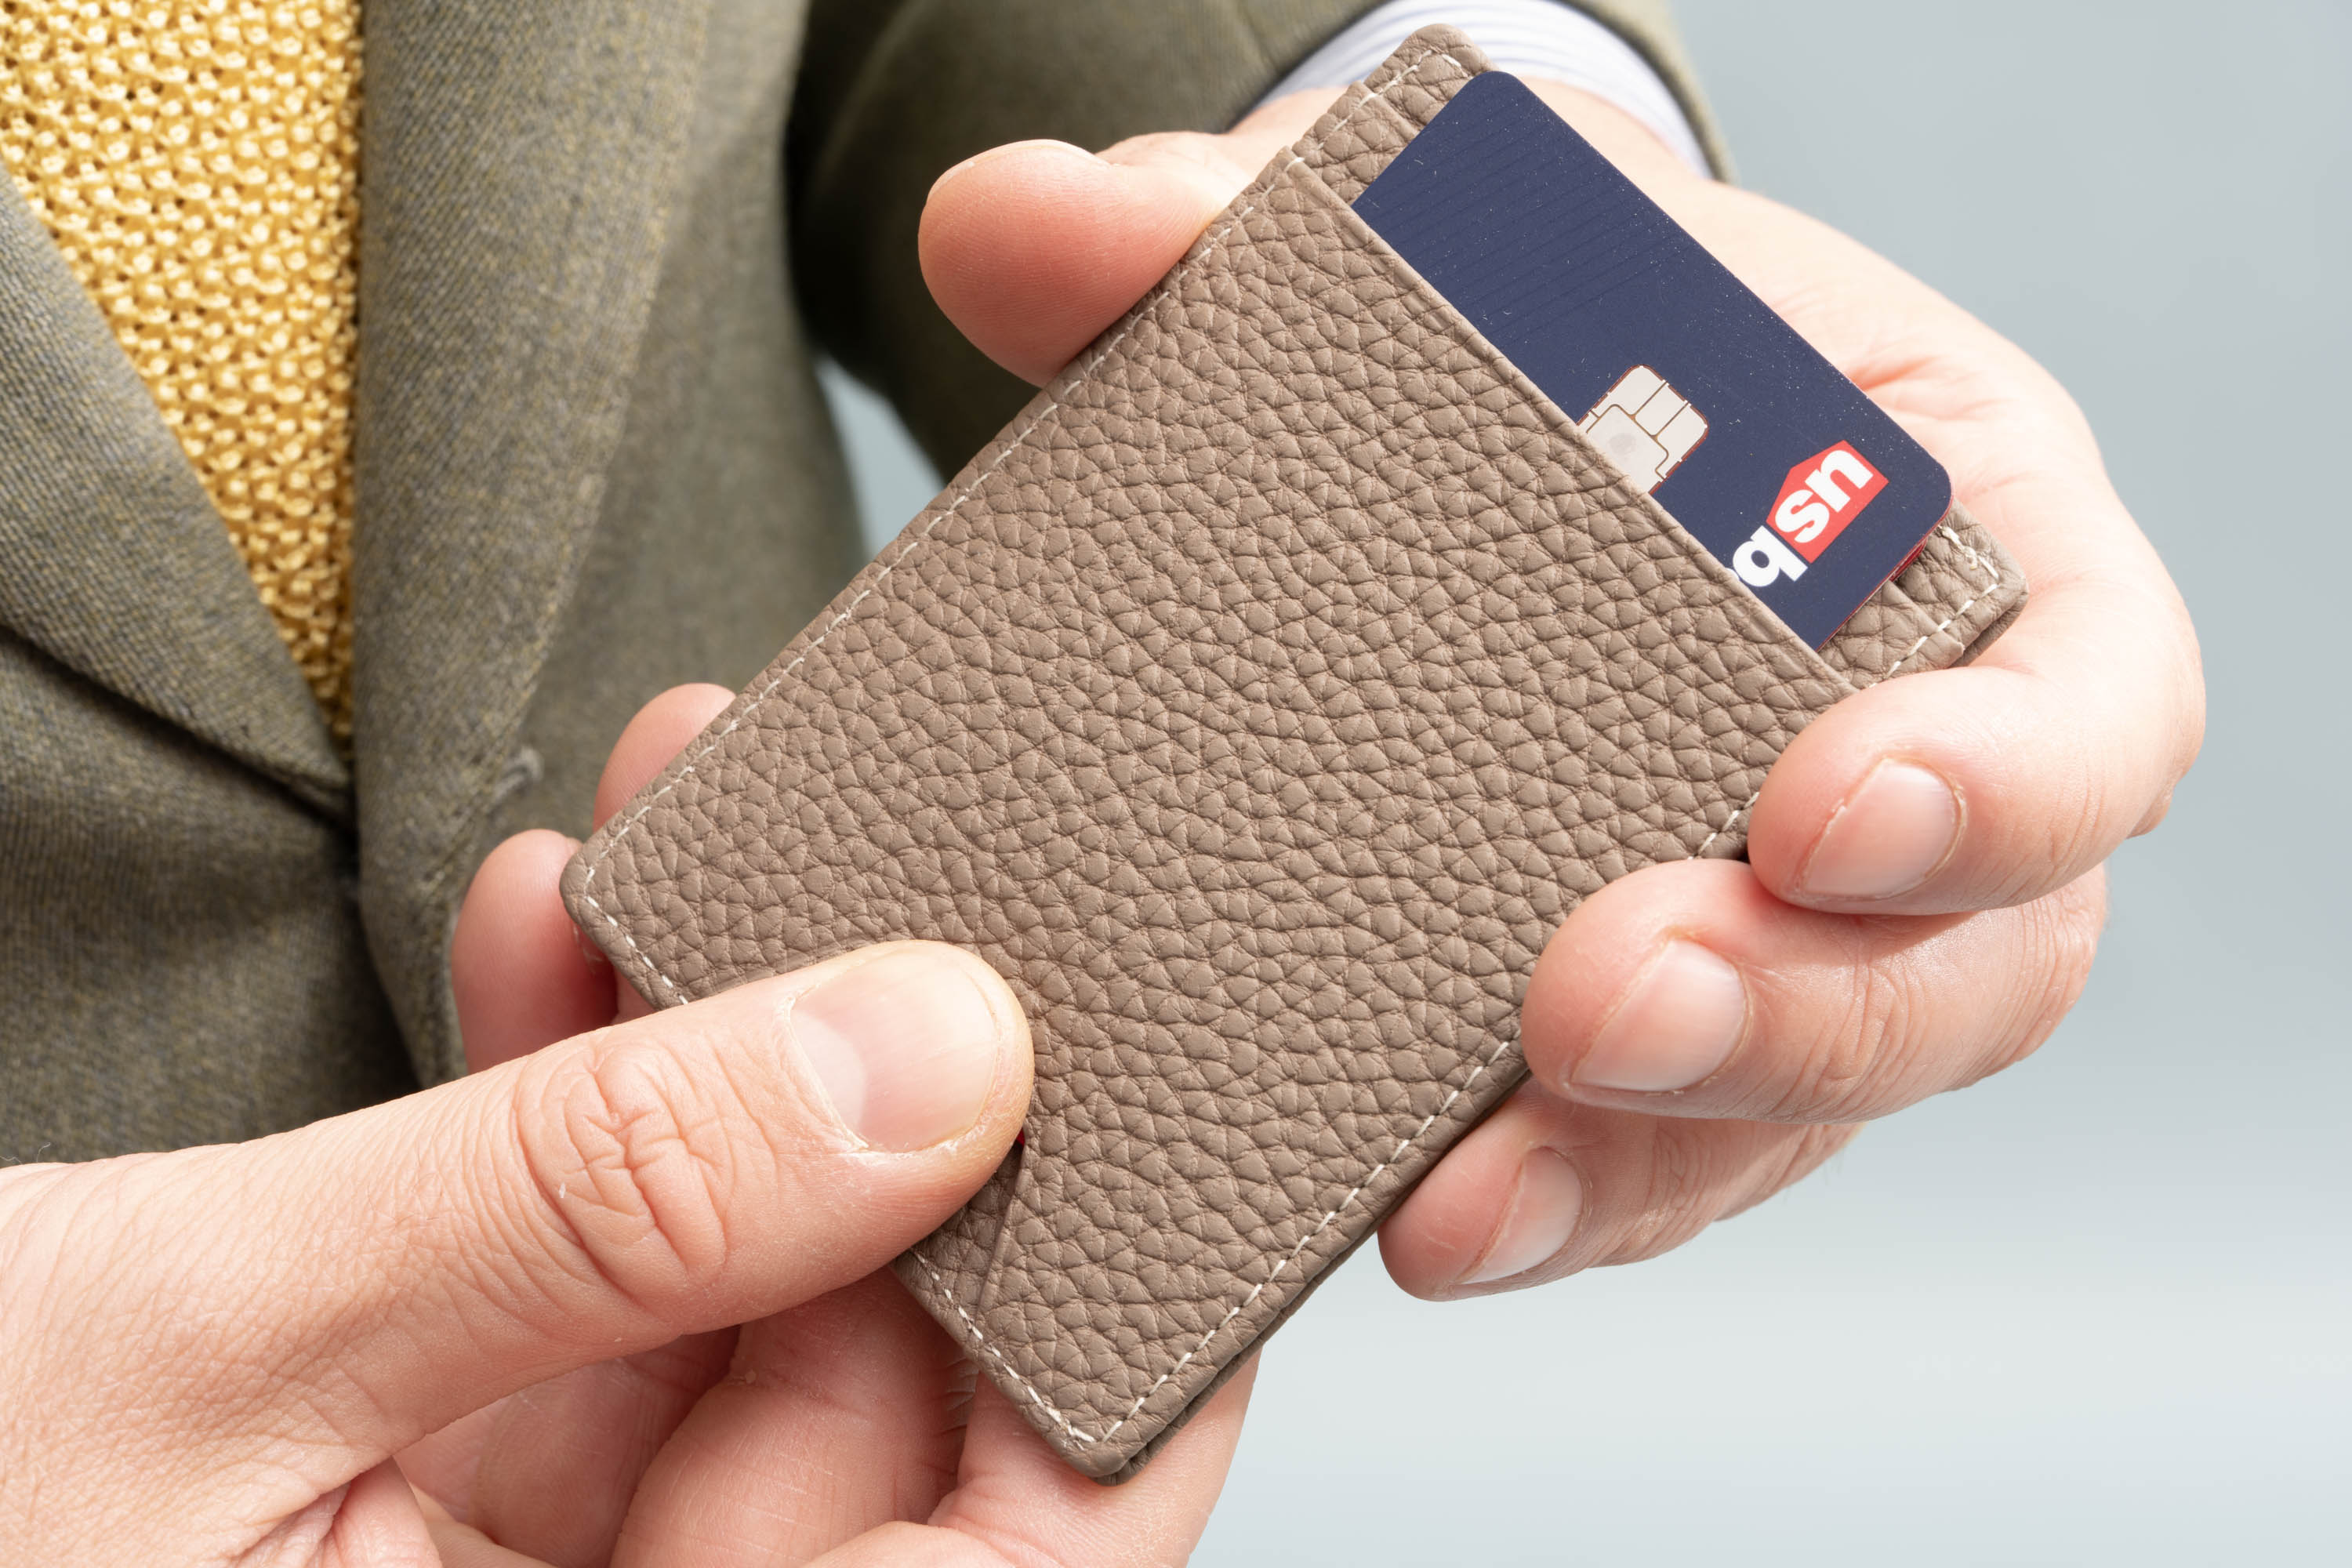 Slim Wallet - 4CC - Boardroom Taupe Togo Full-Grain Leather comes with an RFID blocking feature. 